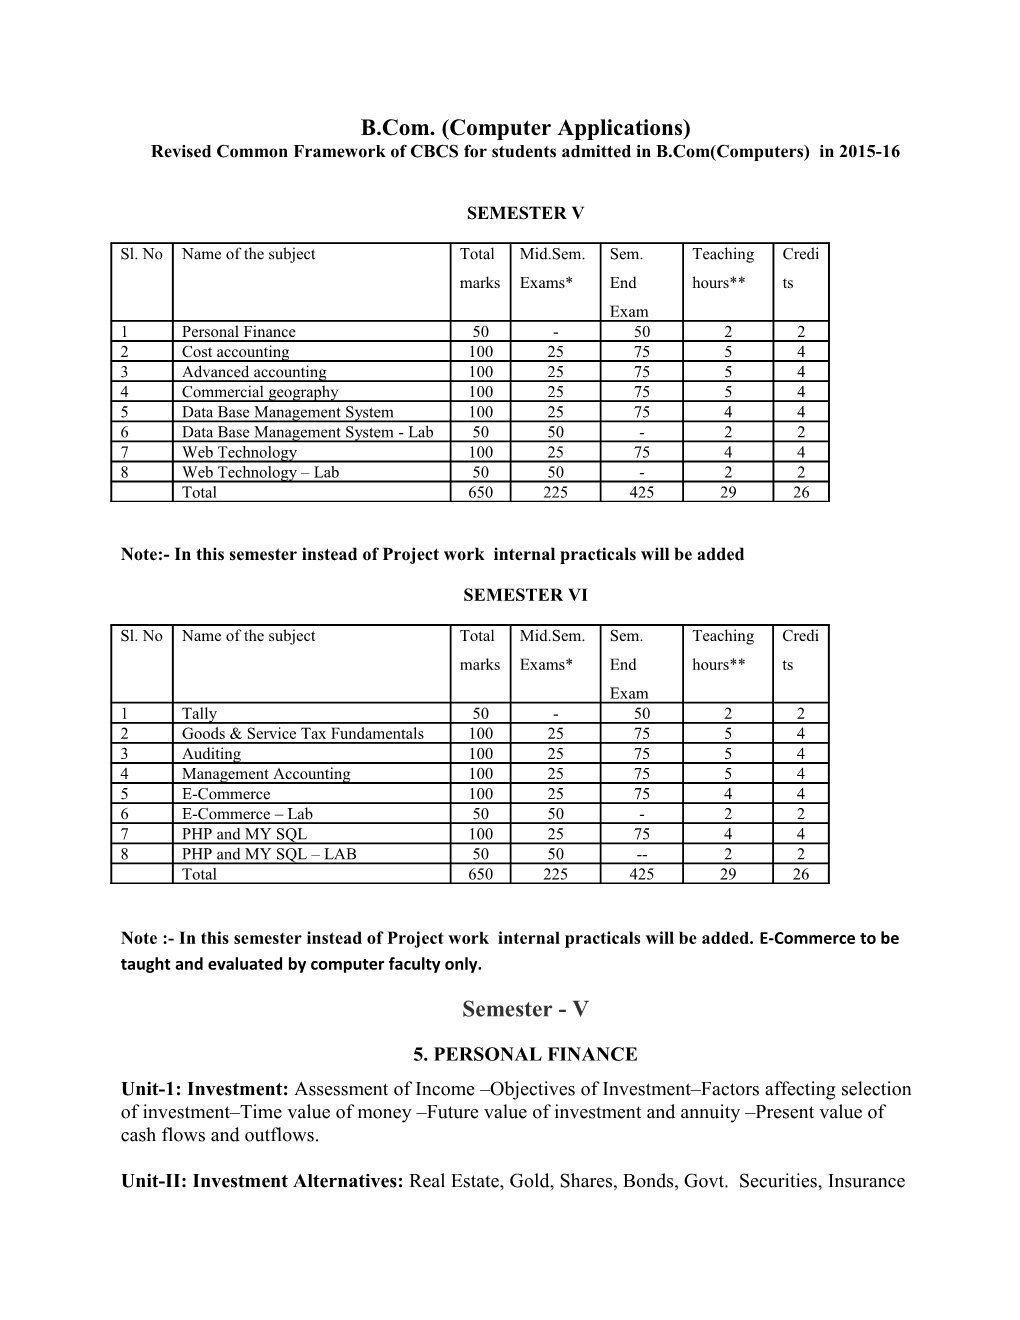 Revised Common Framework of CBCS for Students Admitted in B.Com(Computers) in 2015-16